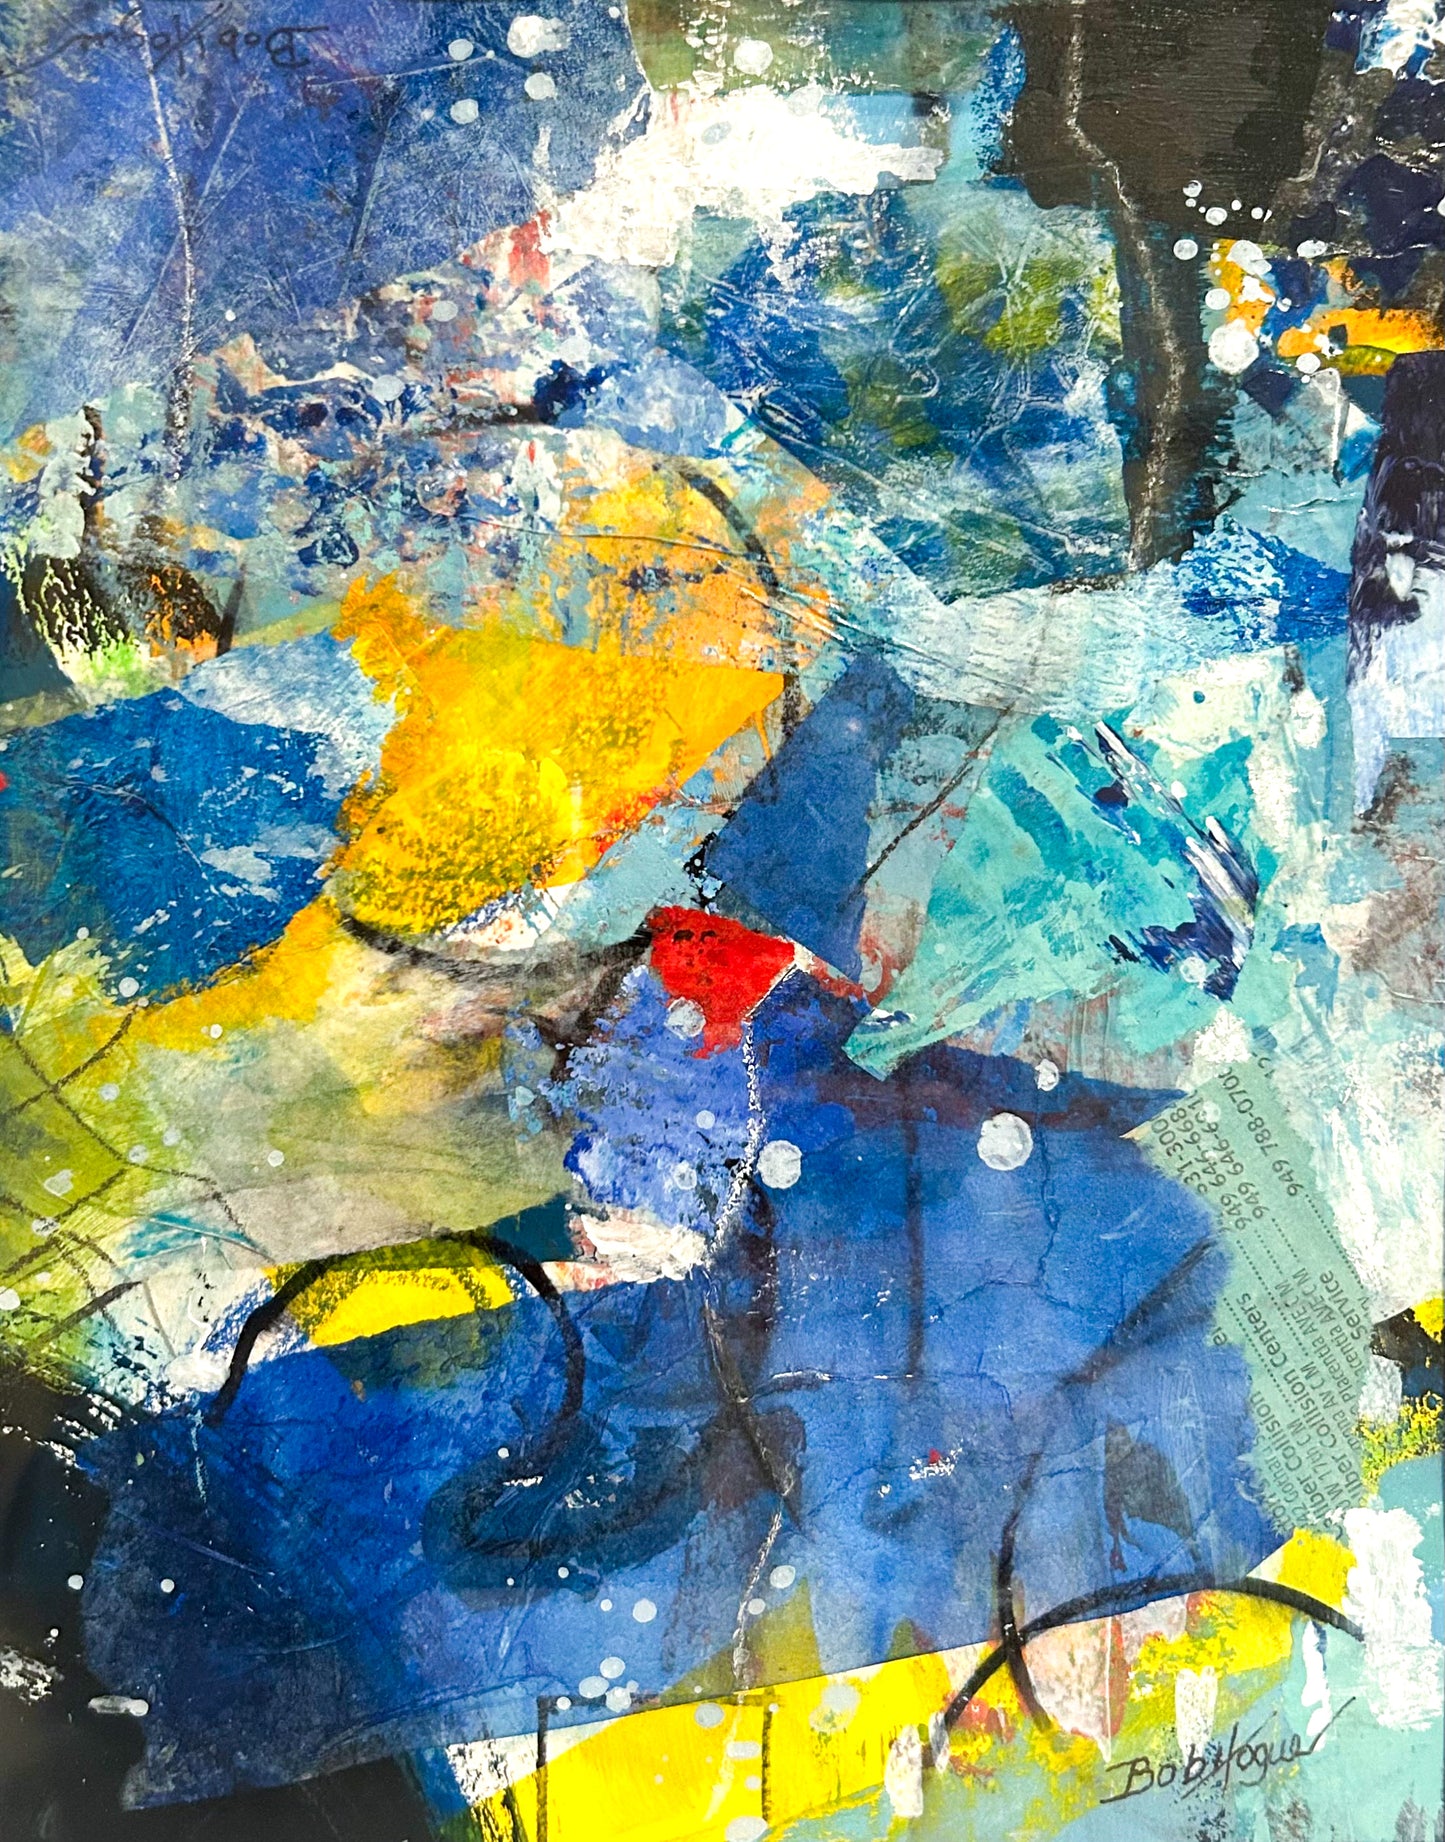 Colorful abstract painting using acrylic; predominant blue, yellow, with teal highlights; artist Bob Hogue; 8"x10"